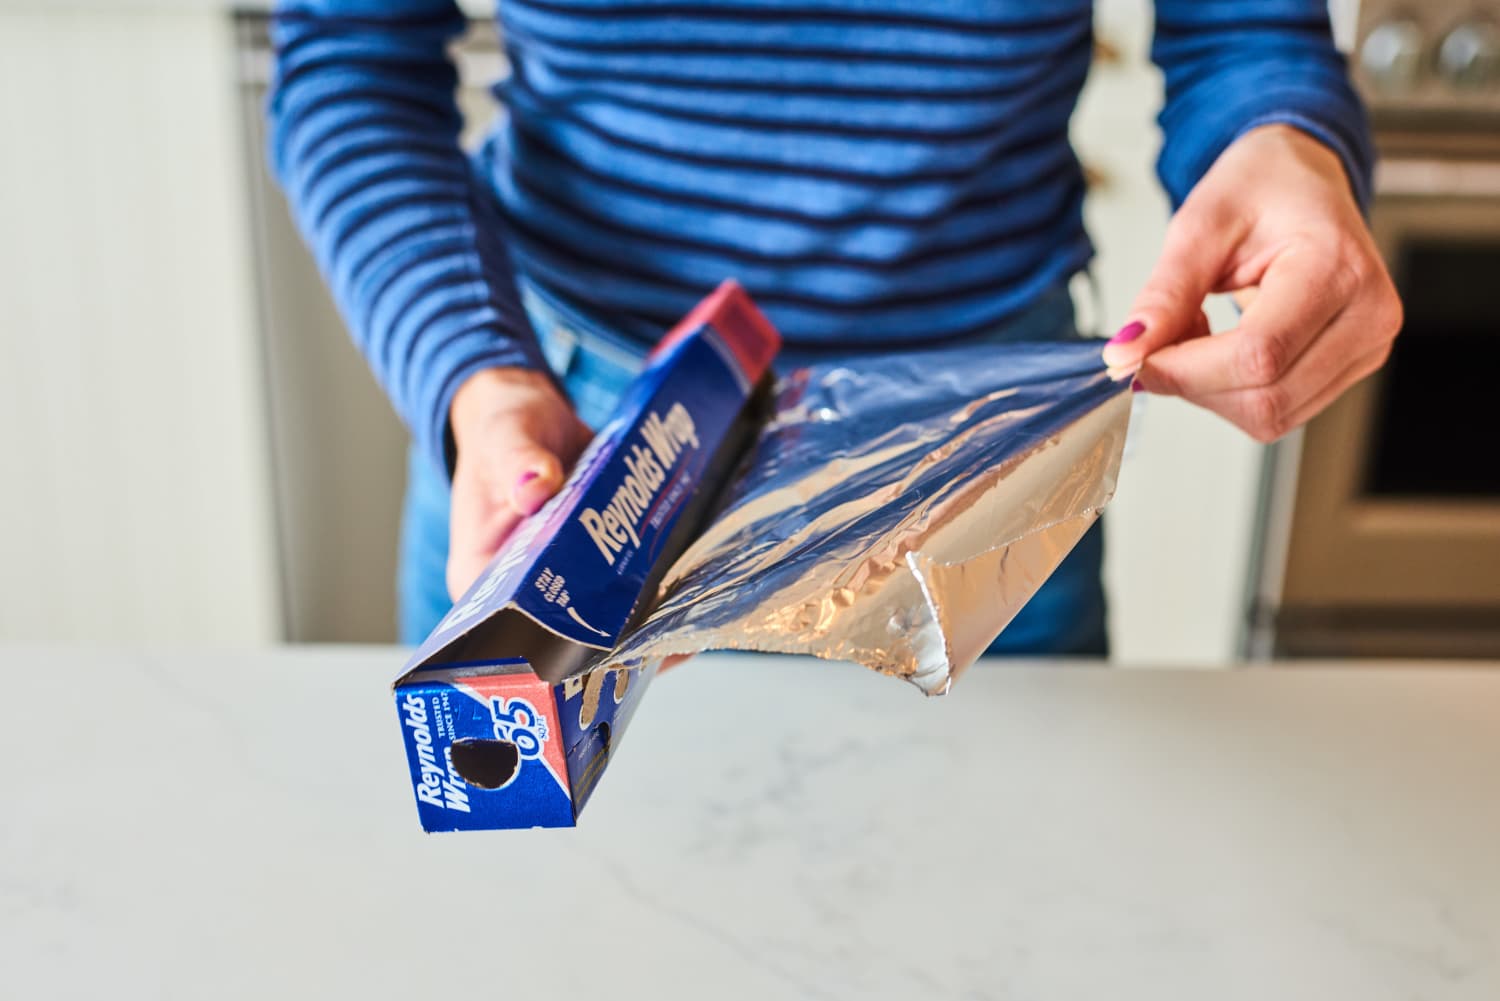 Why You Should Always Clean with Aluminum Foil (Plus, 9 Other Surprising Kitchen Uses)